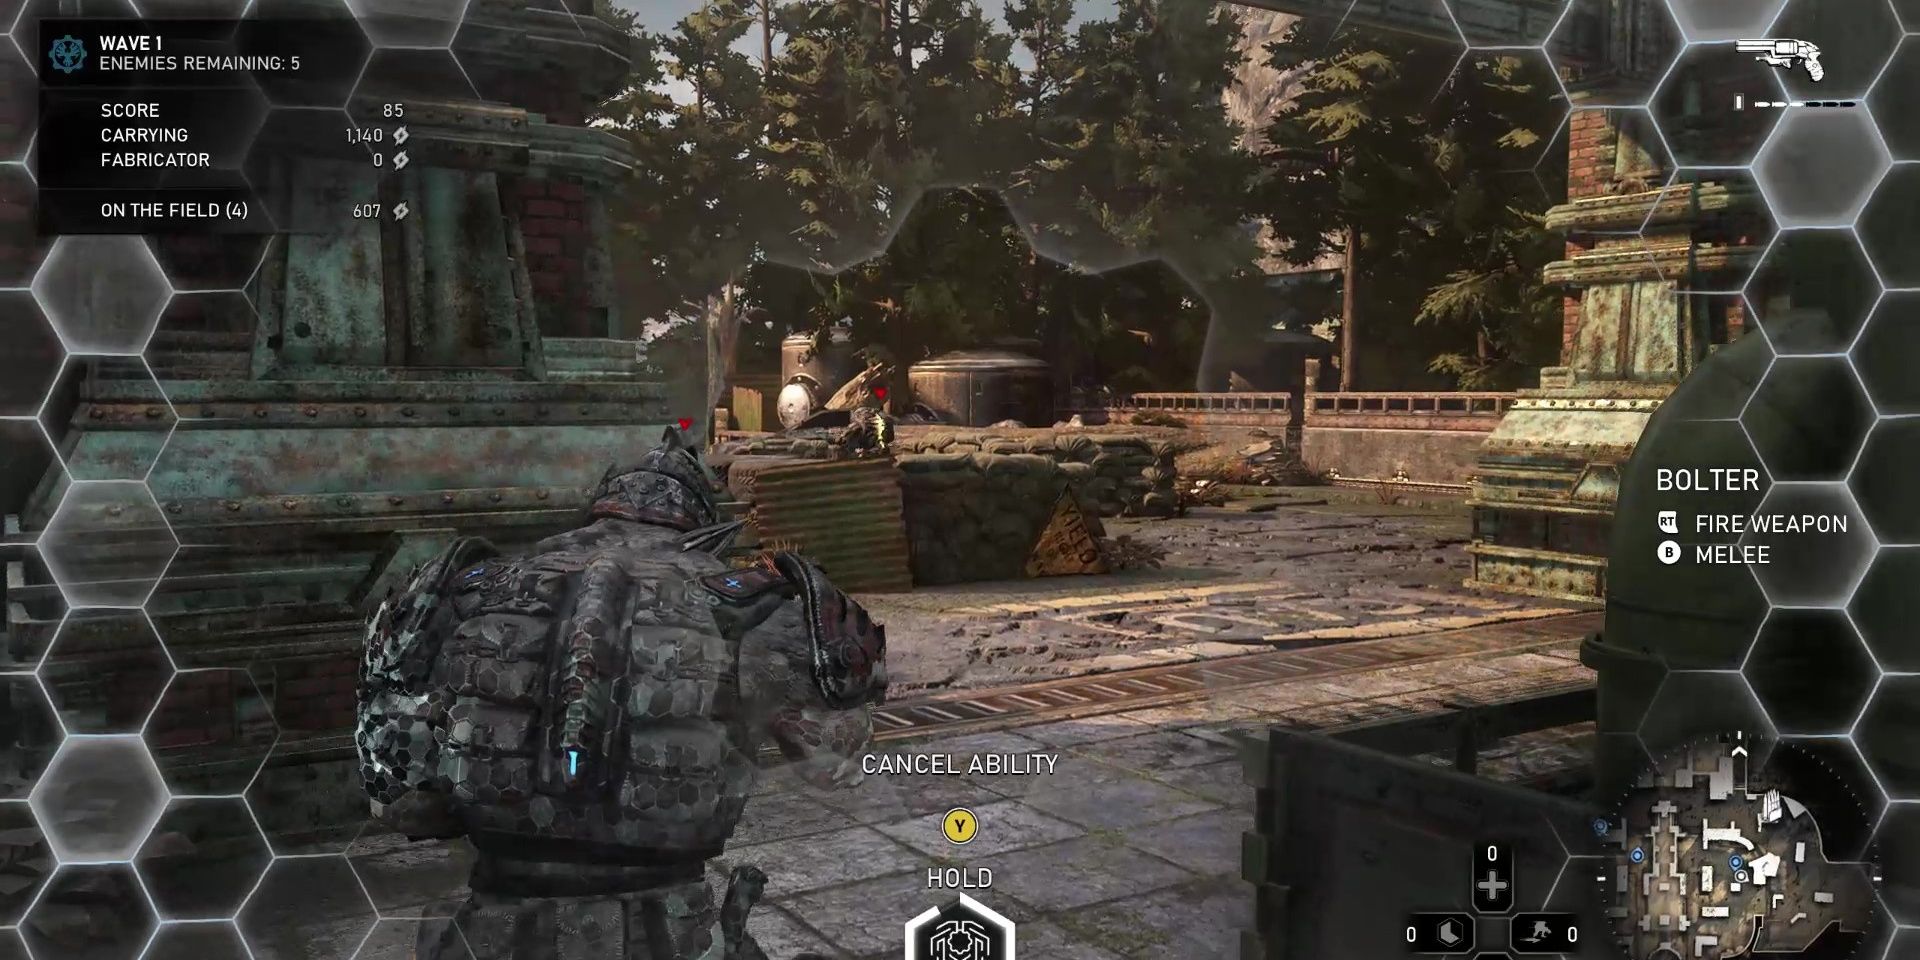 Jack special ability in Gears 5